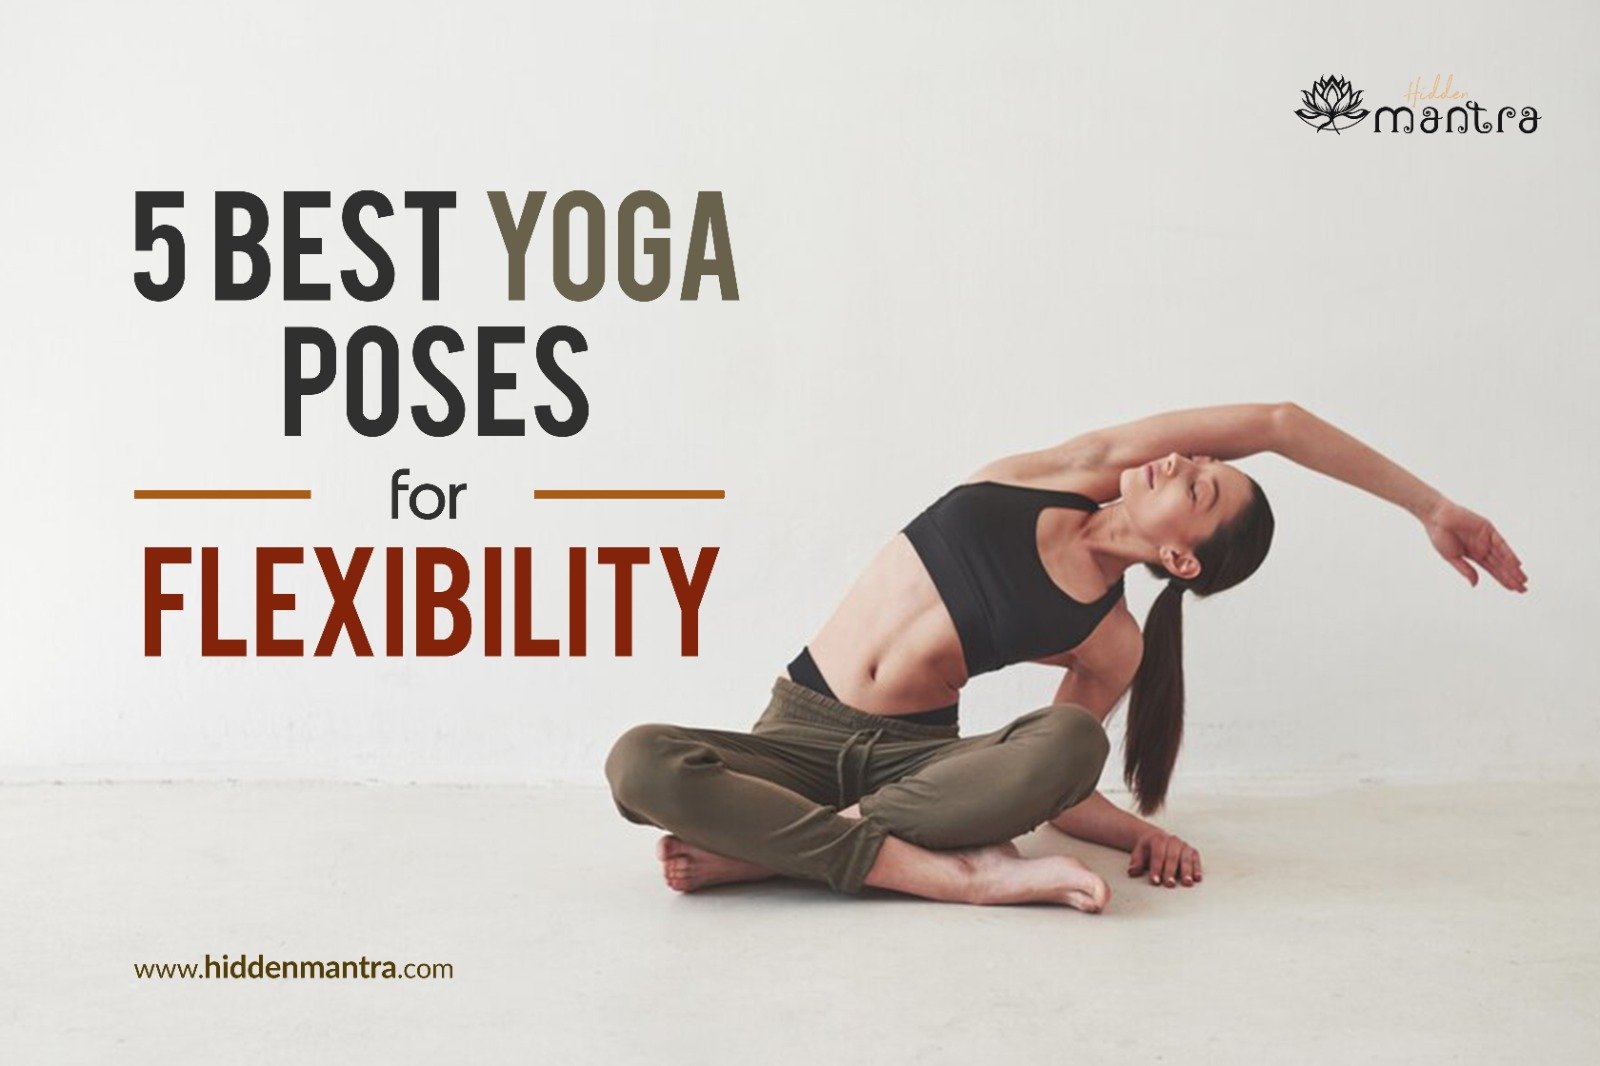 16 Best Yoga Poses For Weight Loss (+ Free PDF) - Yoga Rove